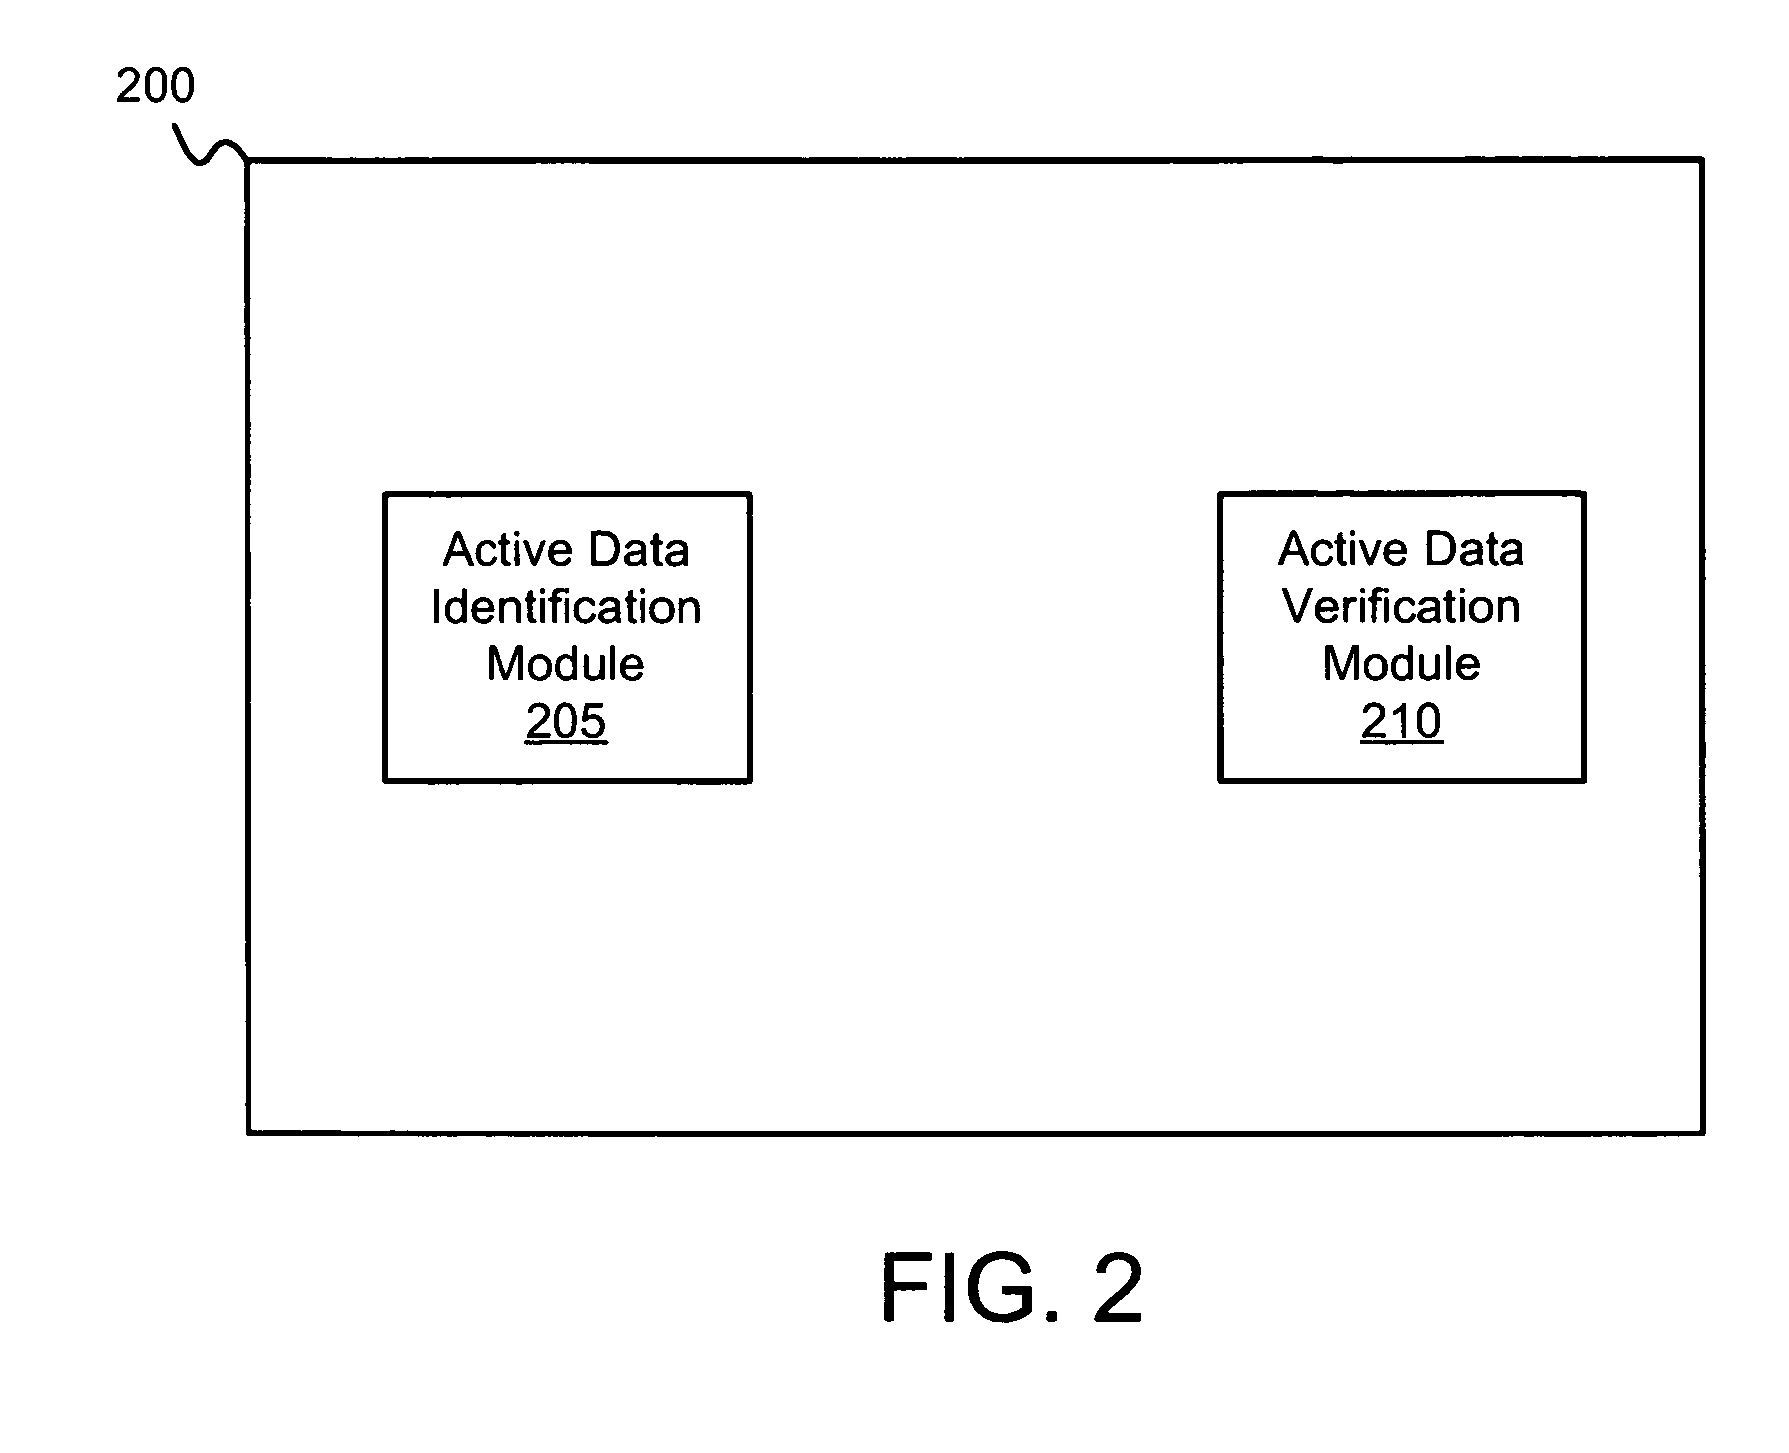 Apparatus, system, and method for active data verification in a storage system